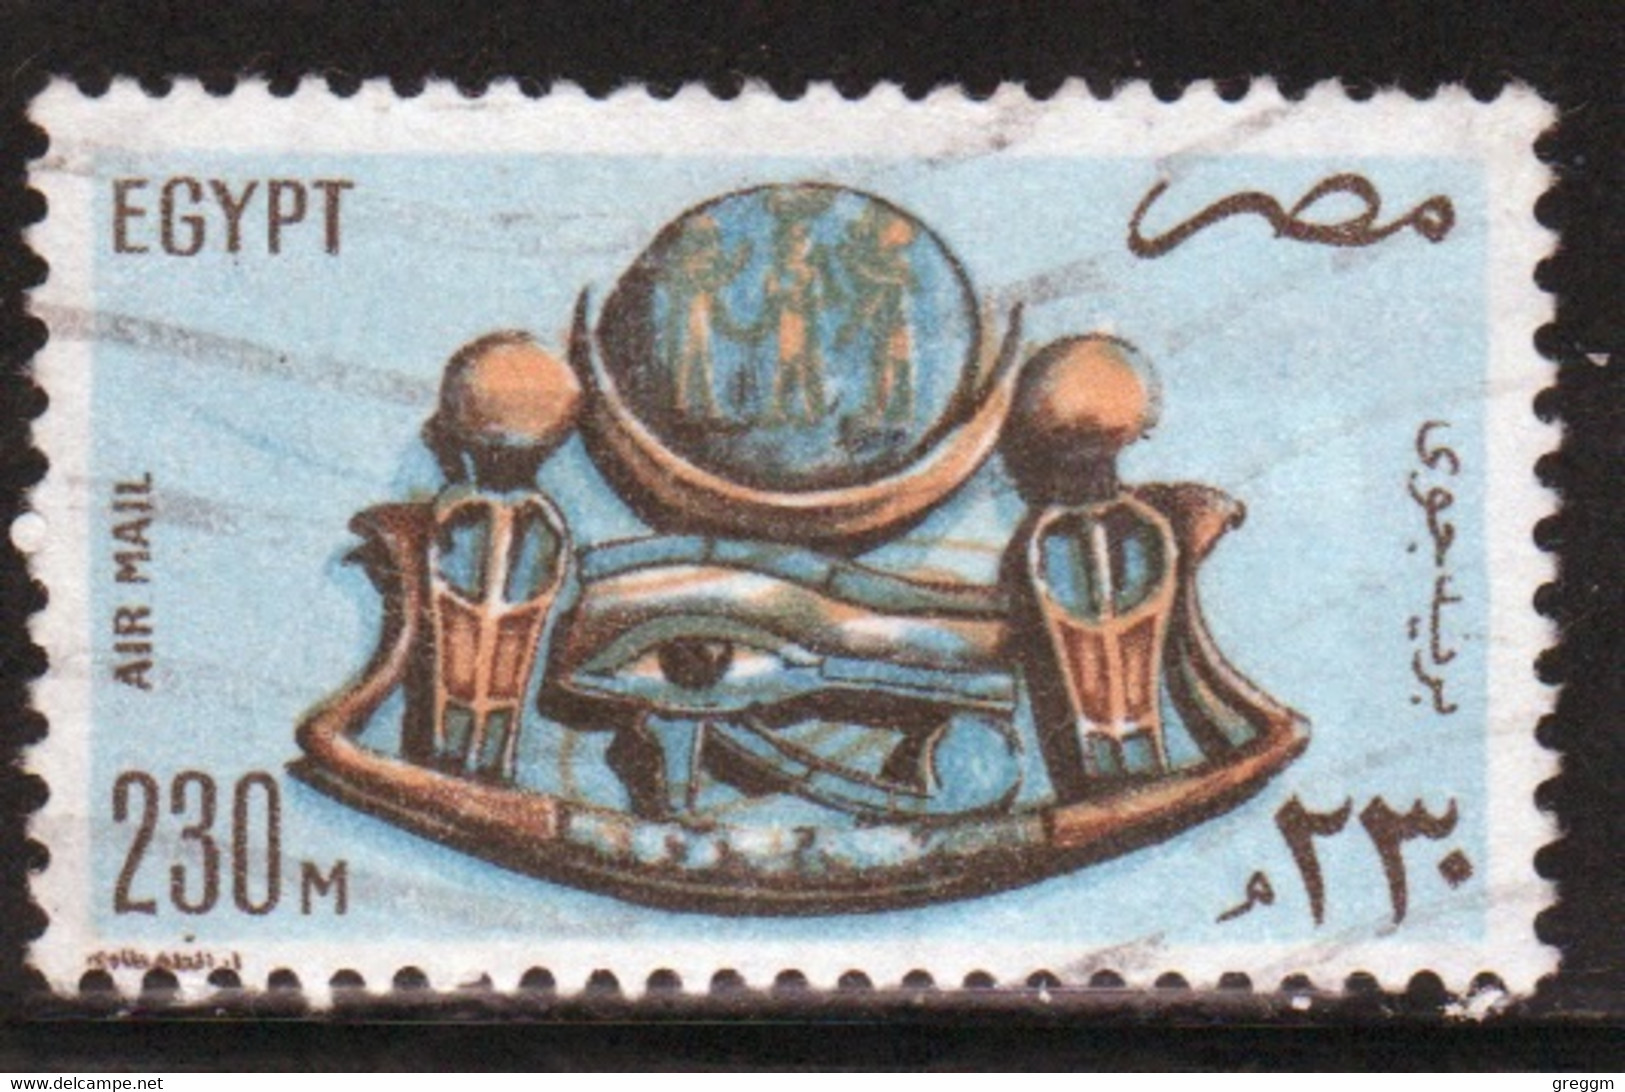 Egypt UAR 1981 Single 230m Stamp Issued To Celebrate Air In Fine Used - Gebraucht